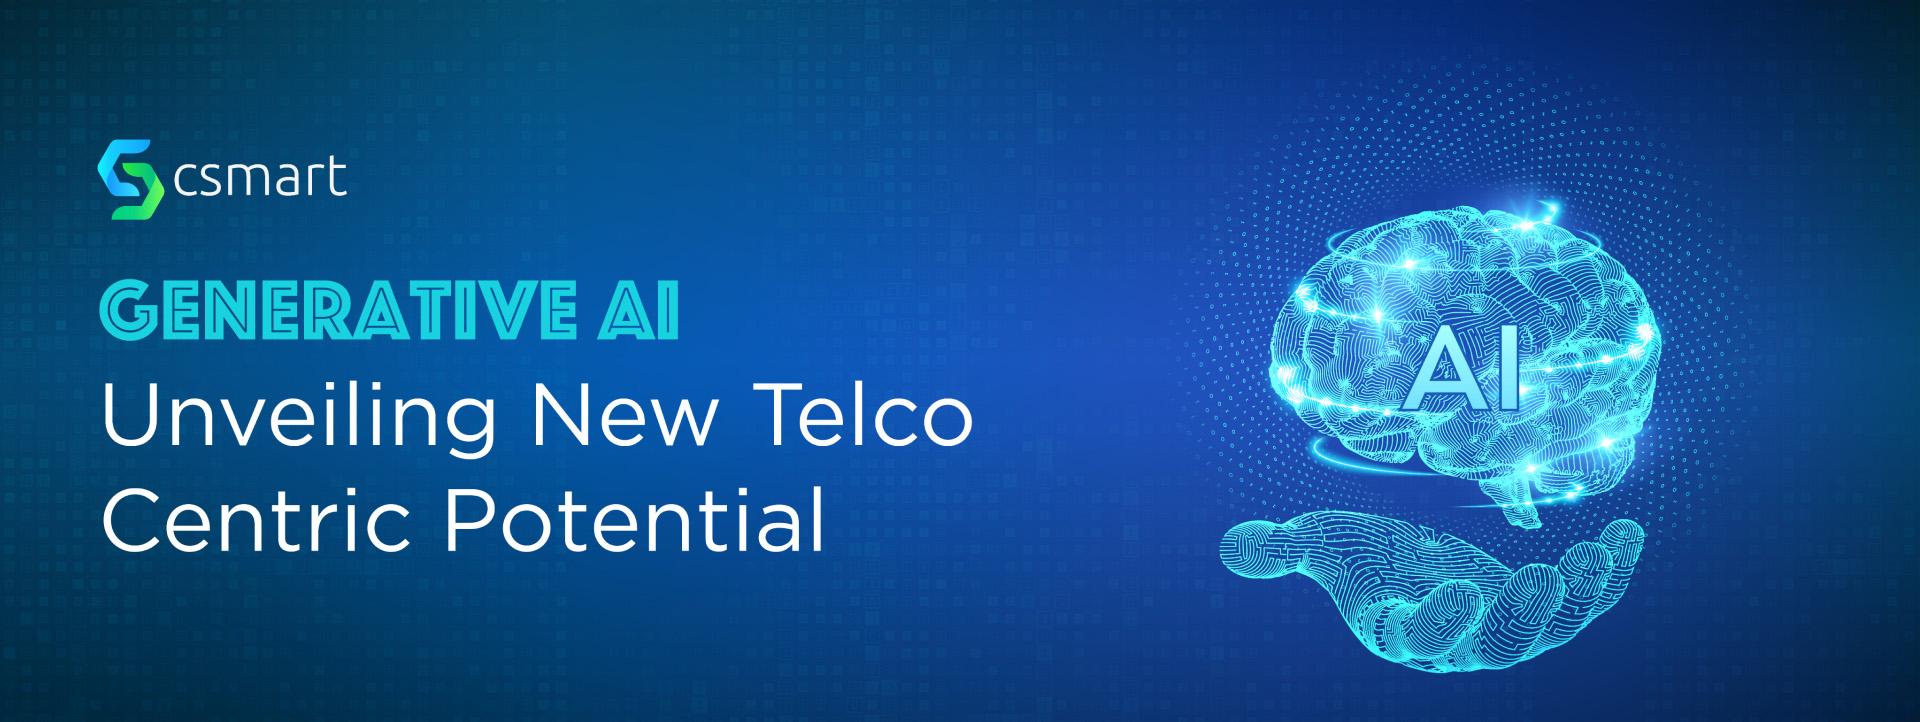 Generative AI: Unveiling New Telco Centric Potential